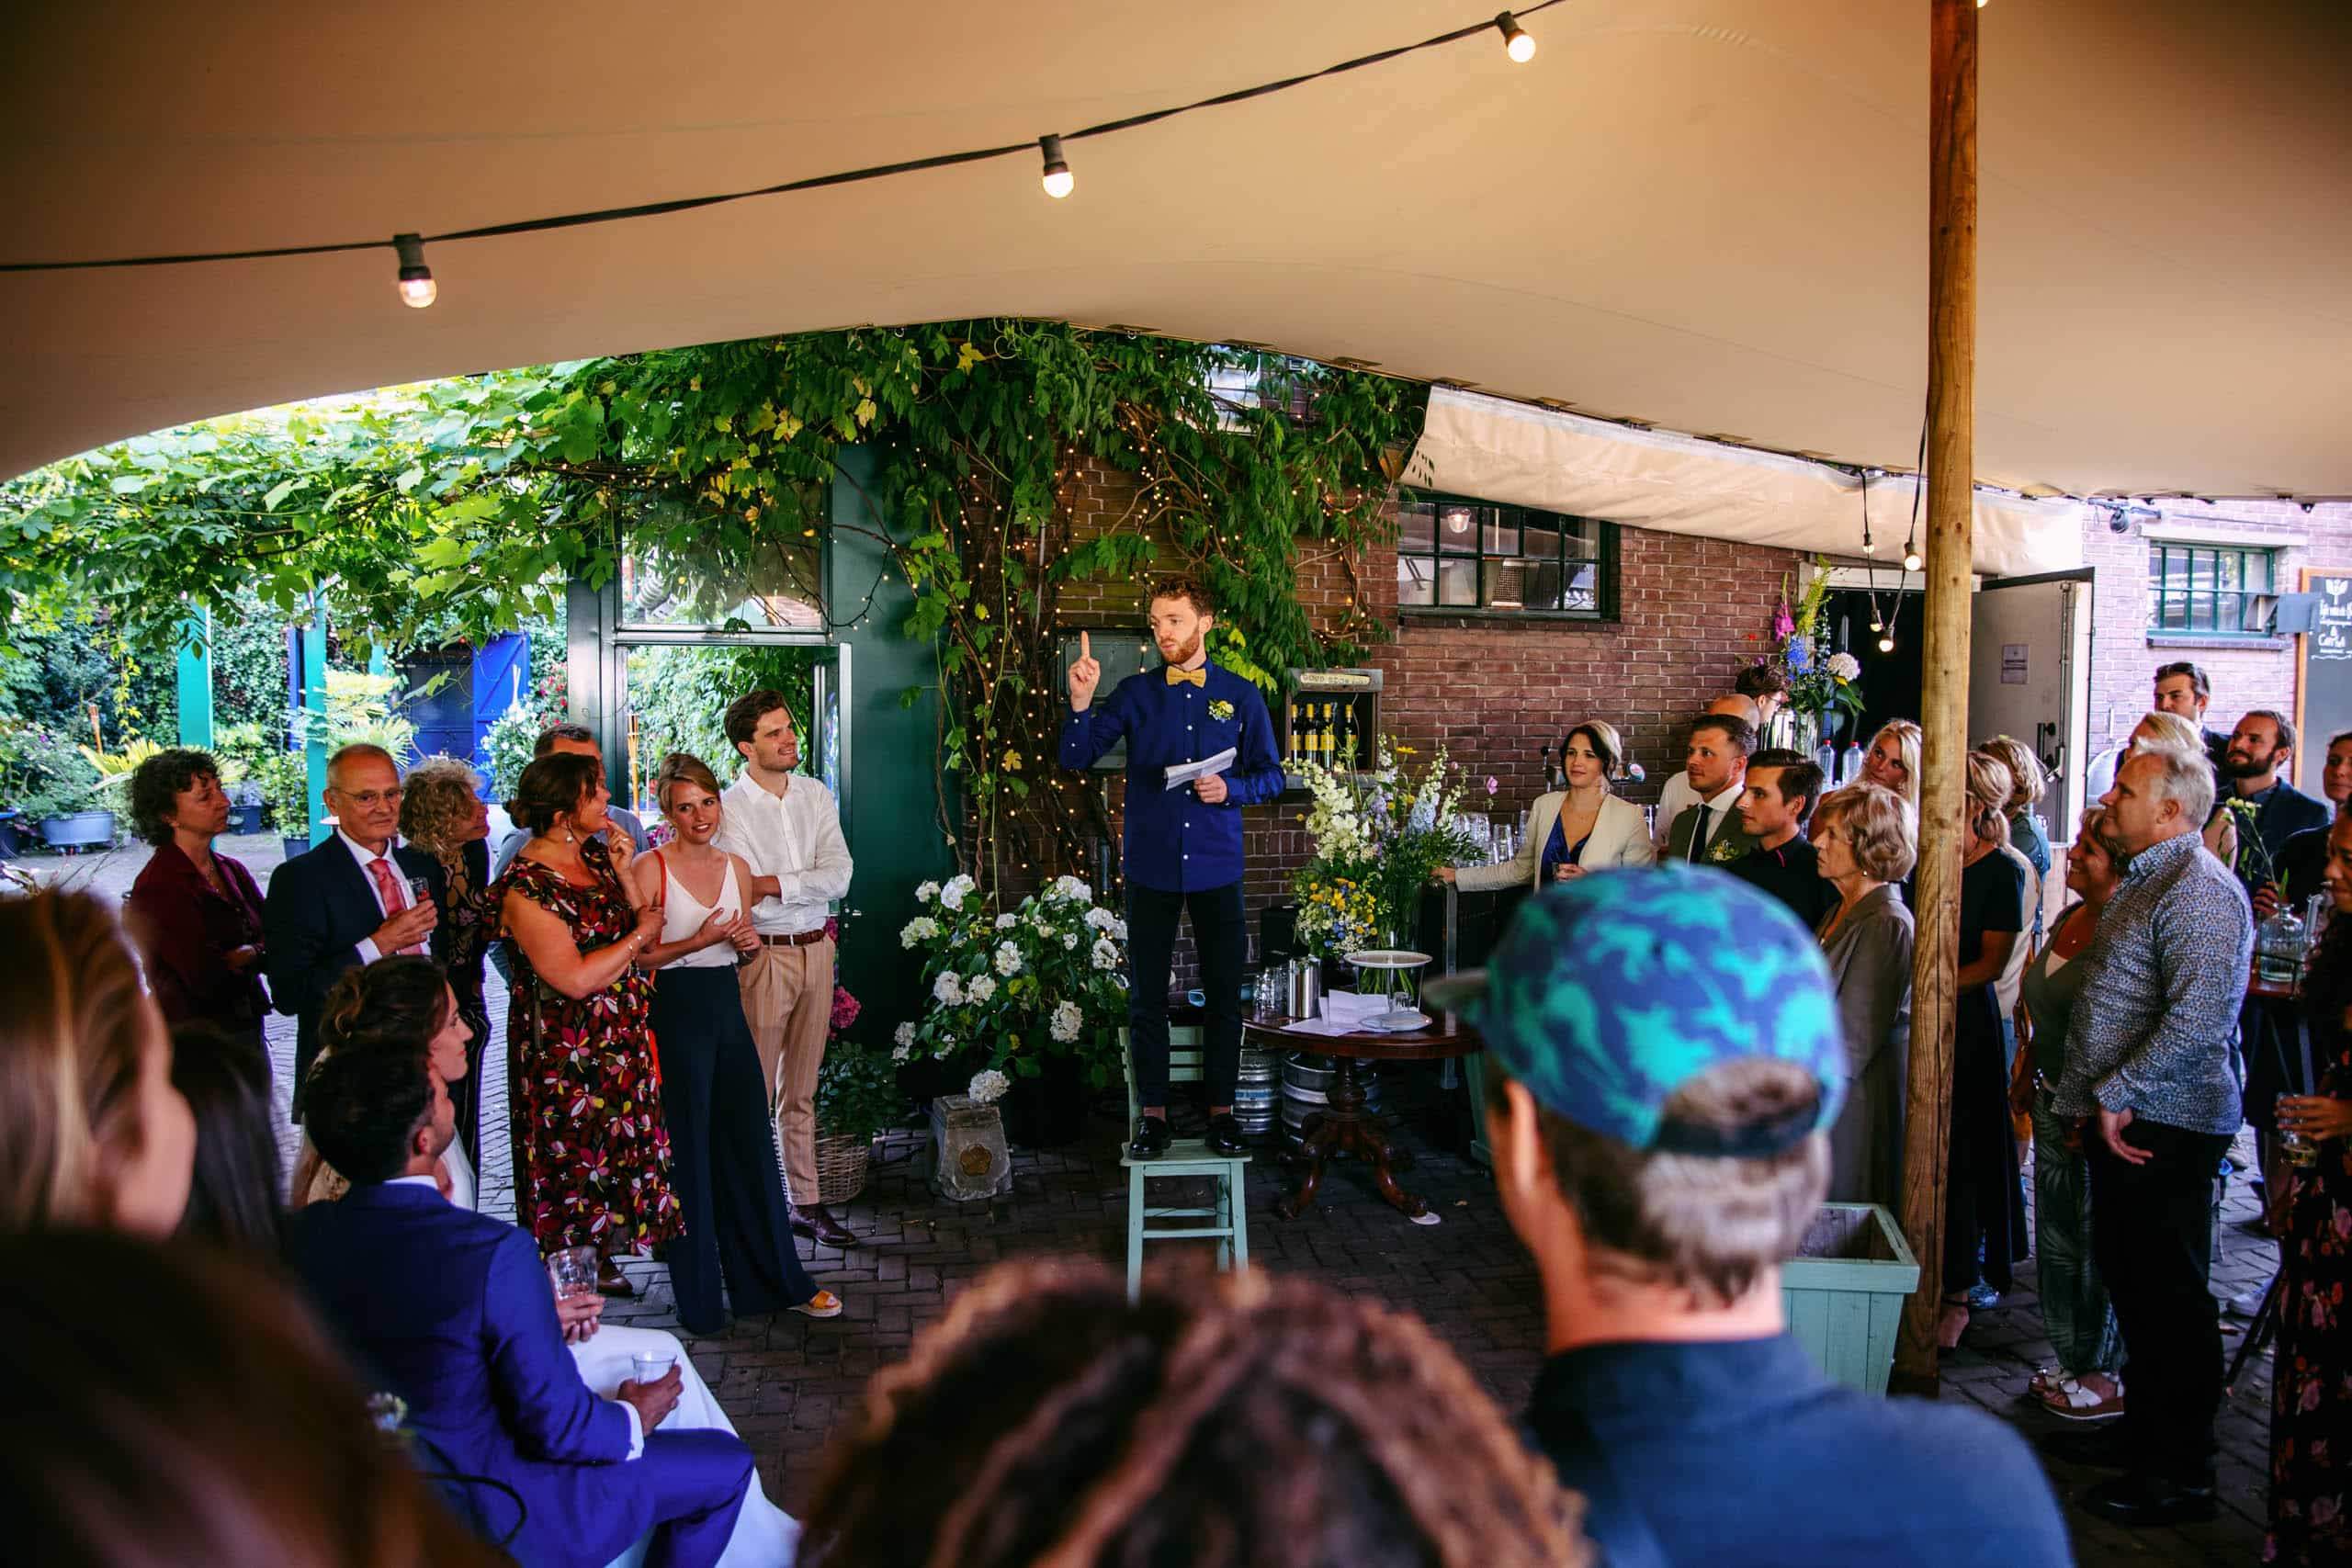 A man gives a speech at a Dutch wedding to a crowd of people.